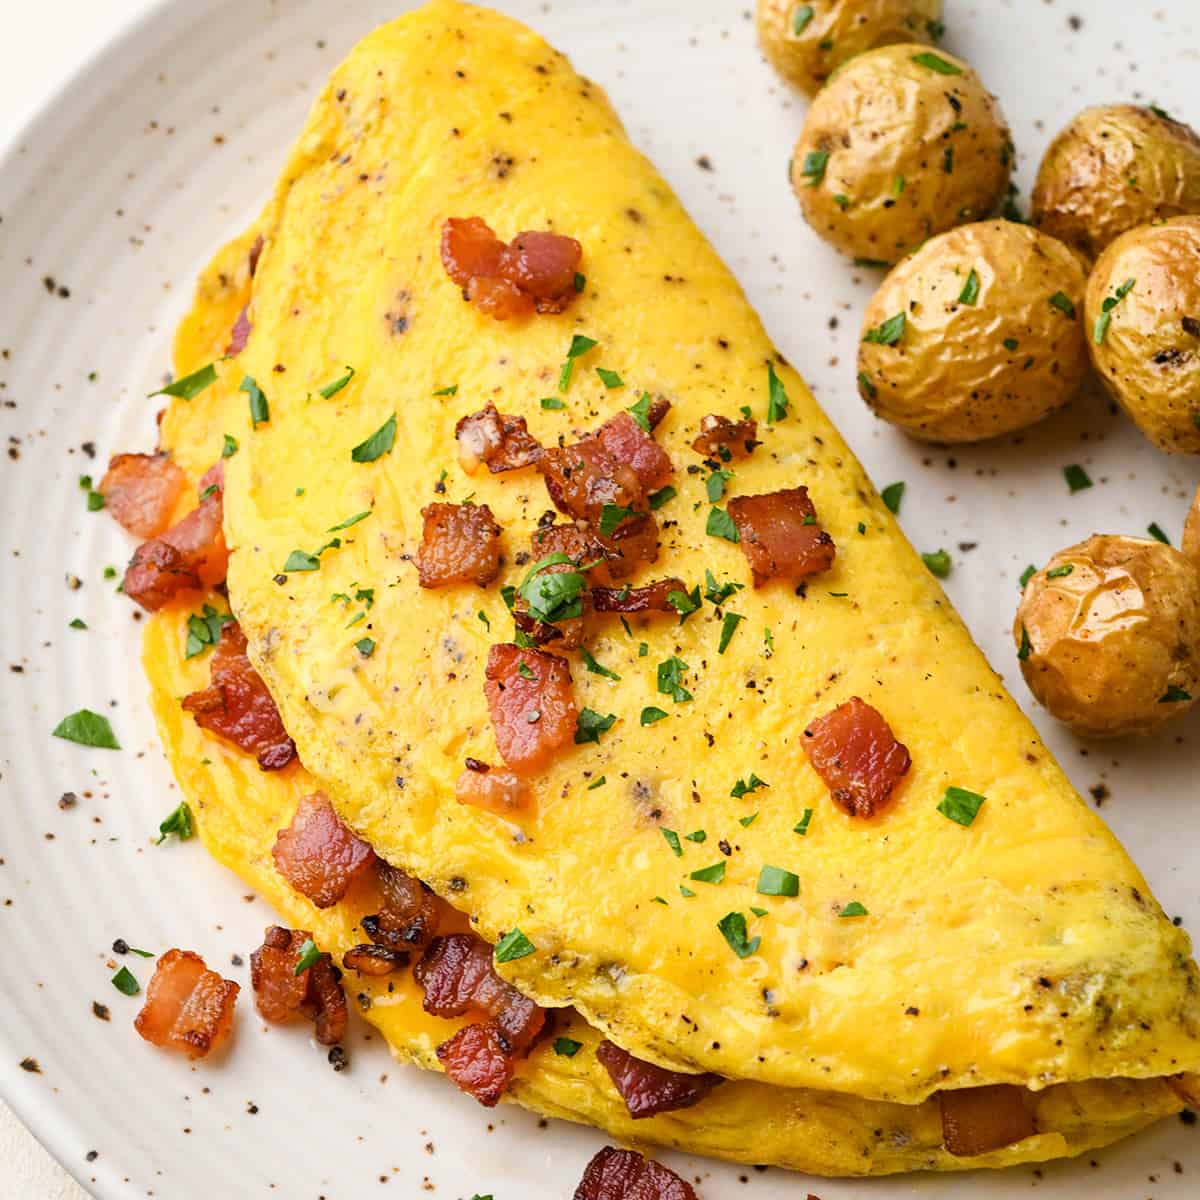 an omelette on a plate with bacon and potatoes